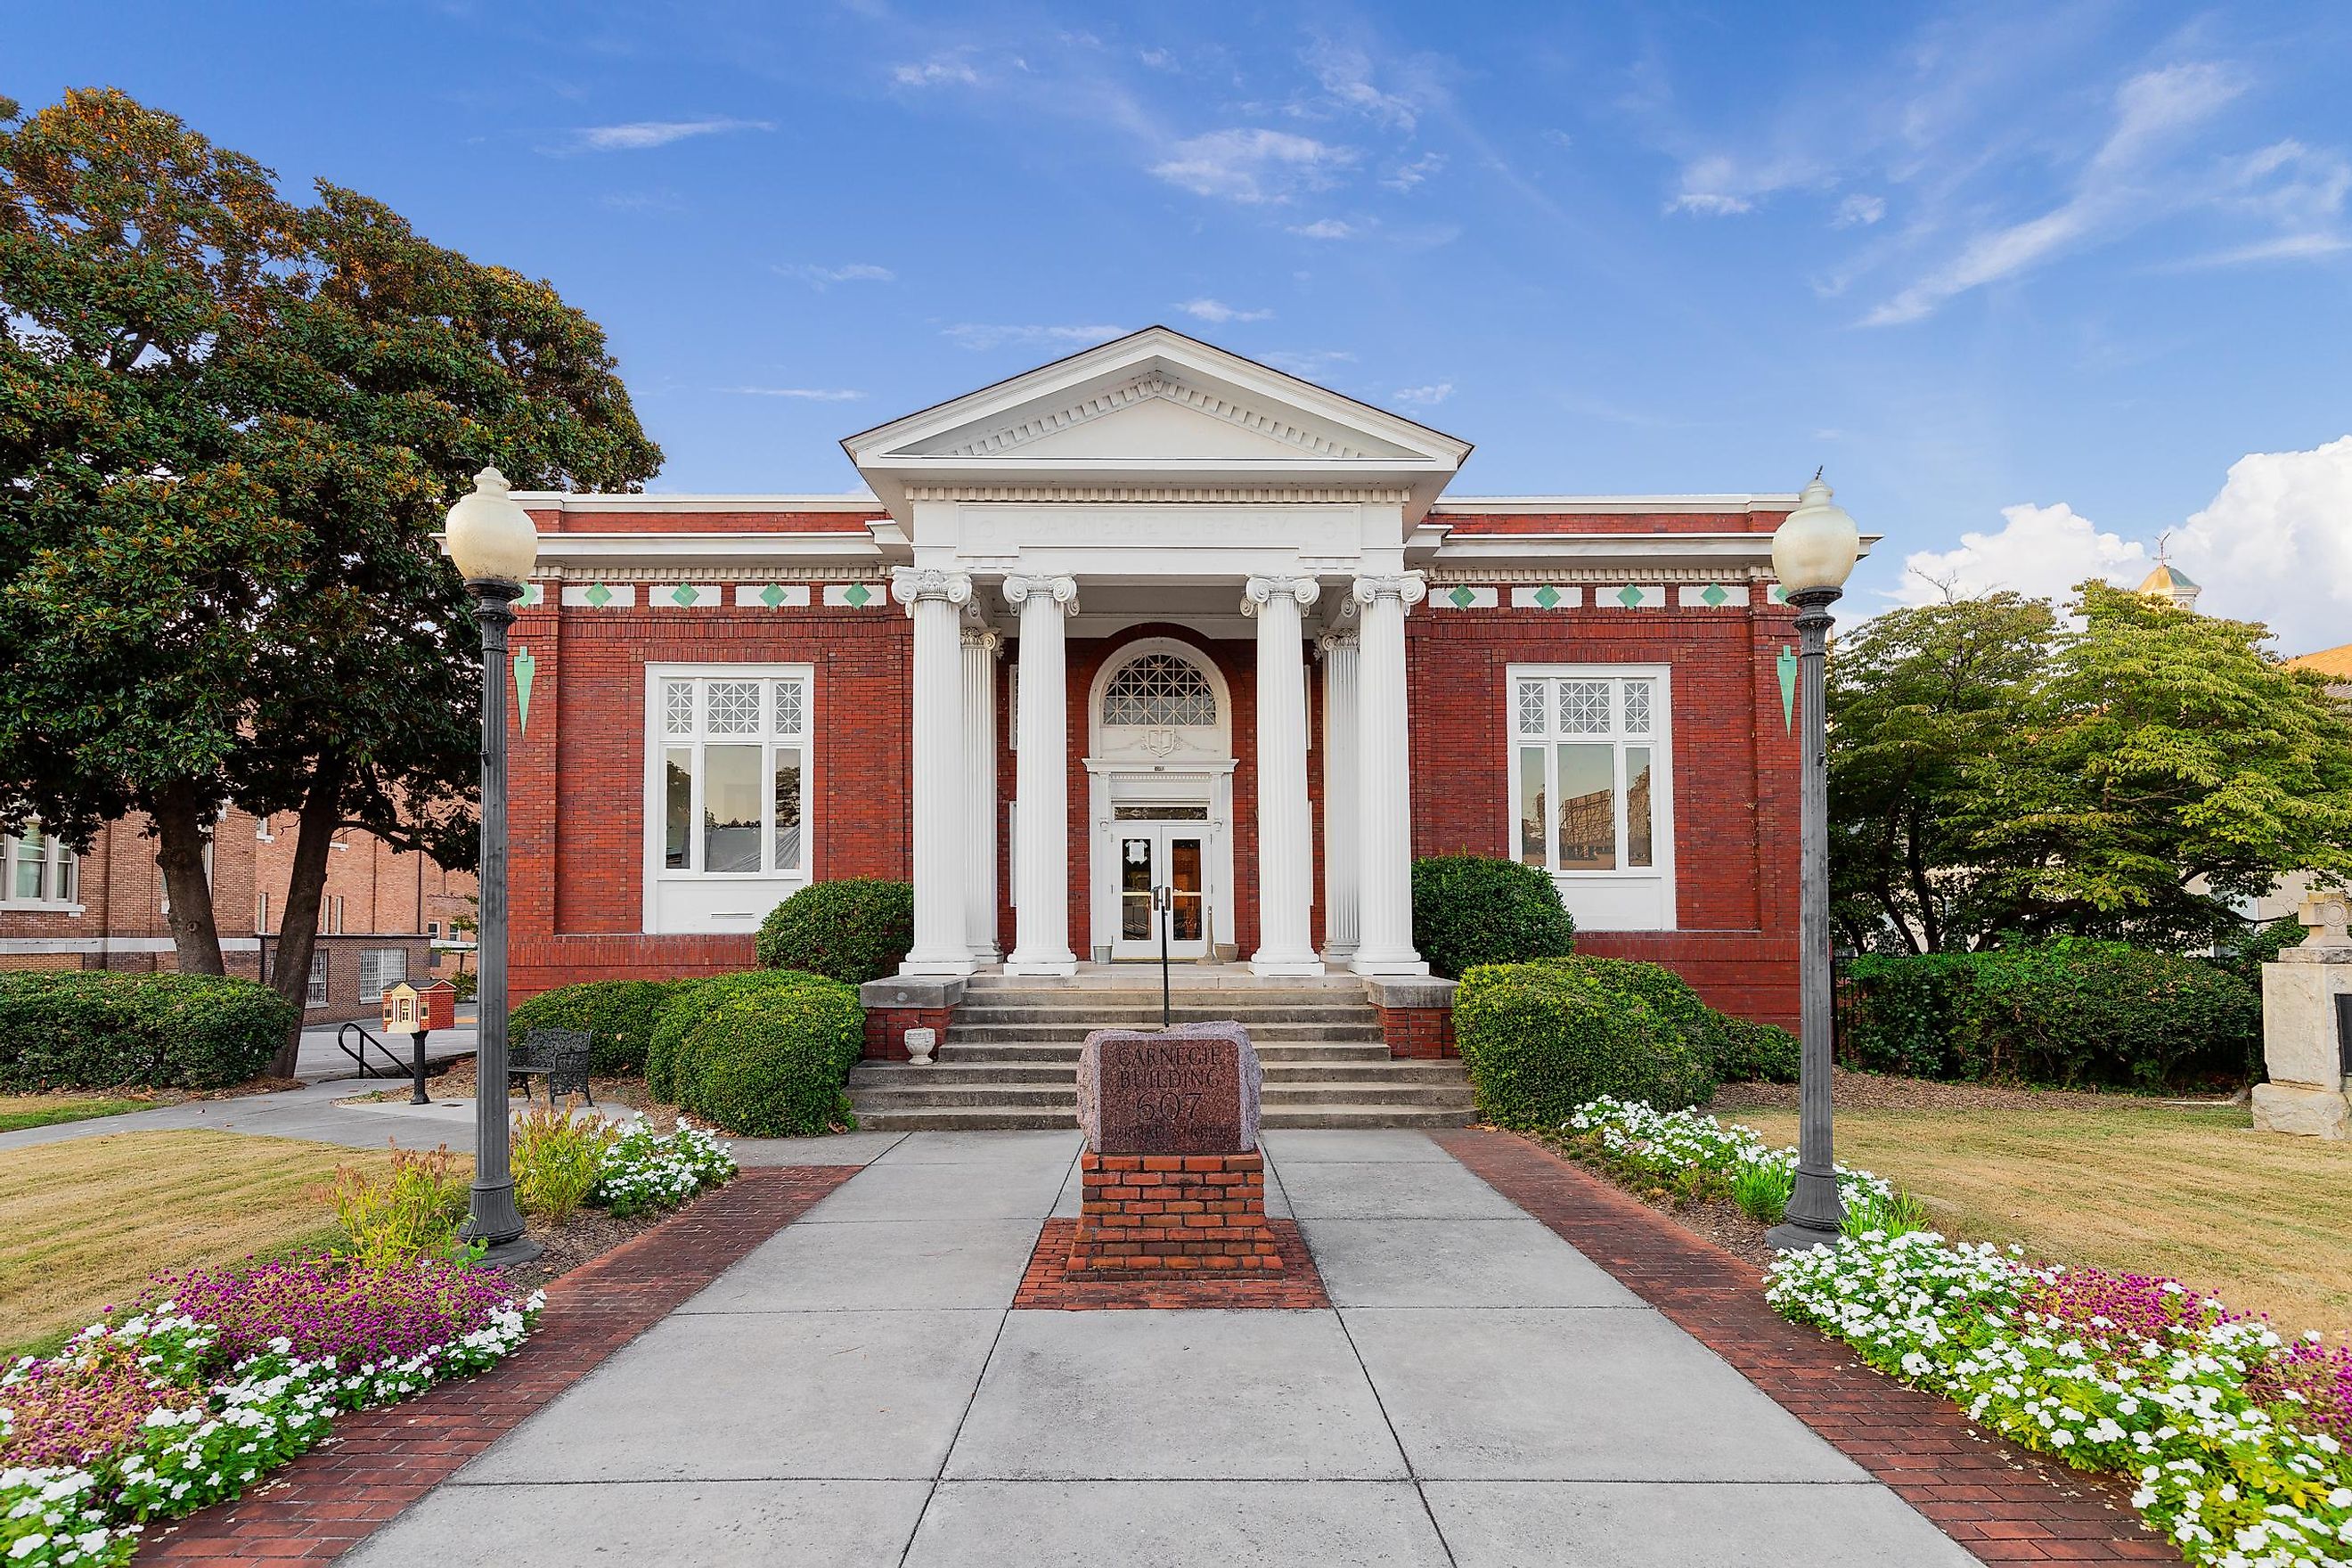 The Old Carnegie Library was built in 1911 by Andrew Carnegie